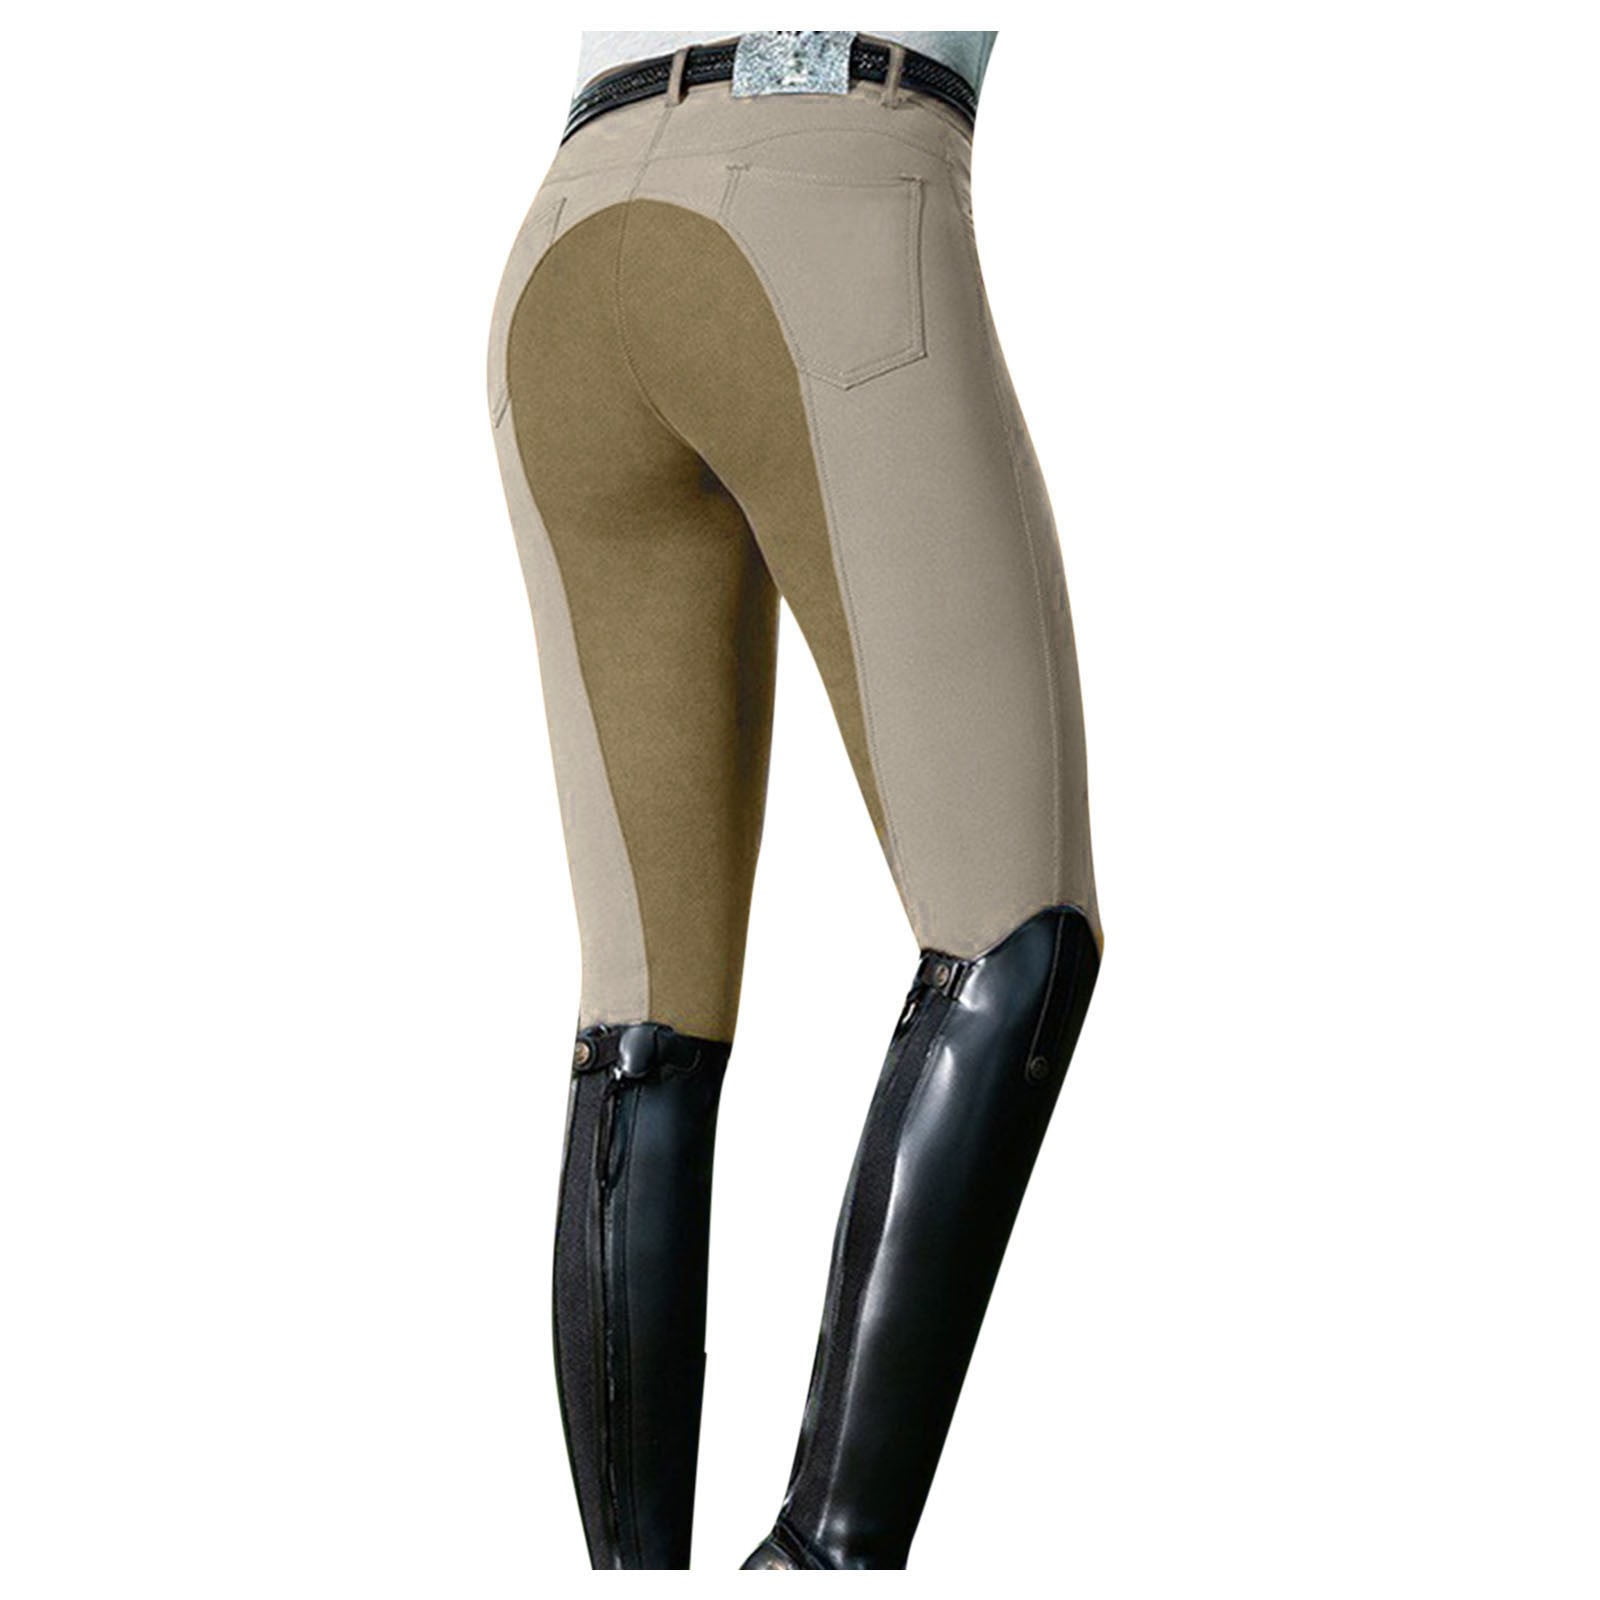 Little Unicorn Breeches by Little Rider with Gel Full Seat Navy/Candy Pink 3-10y 